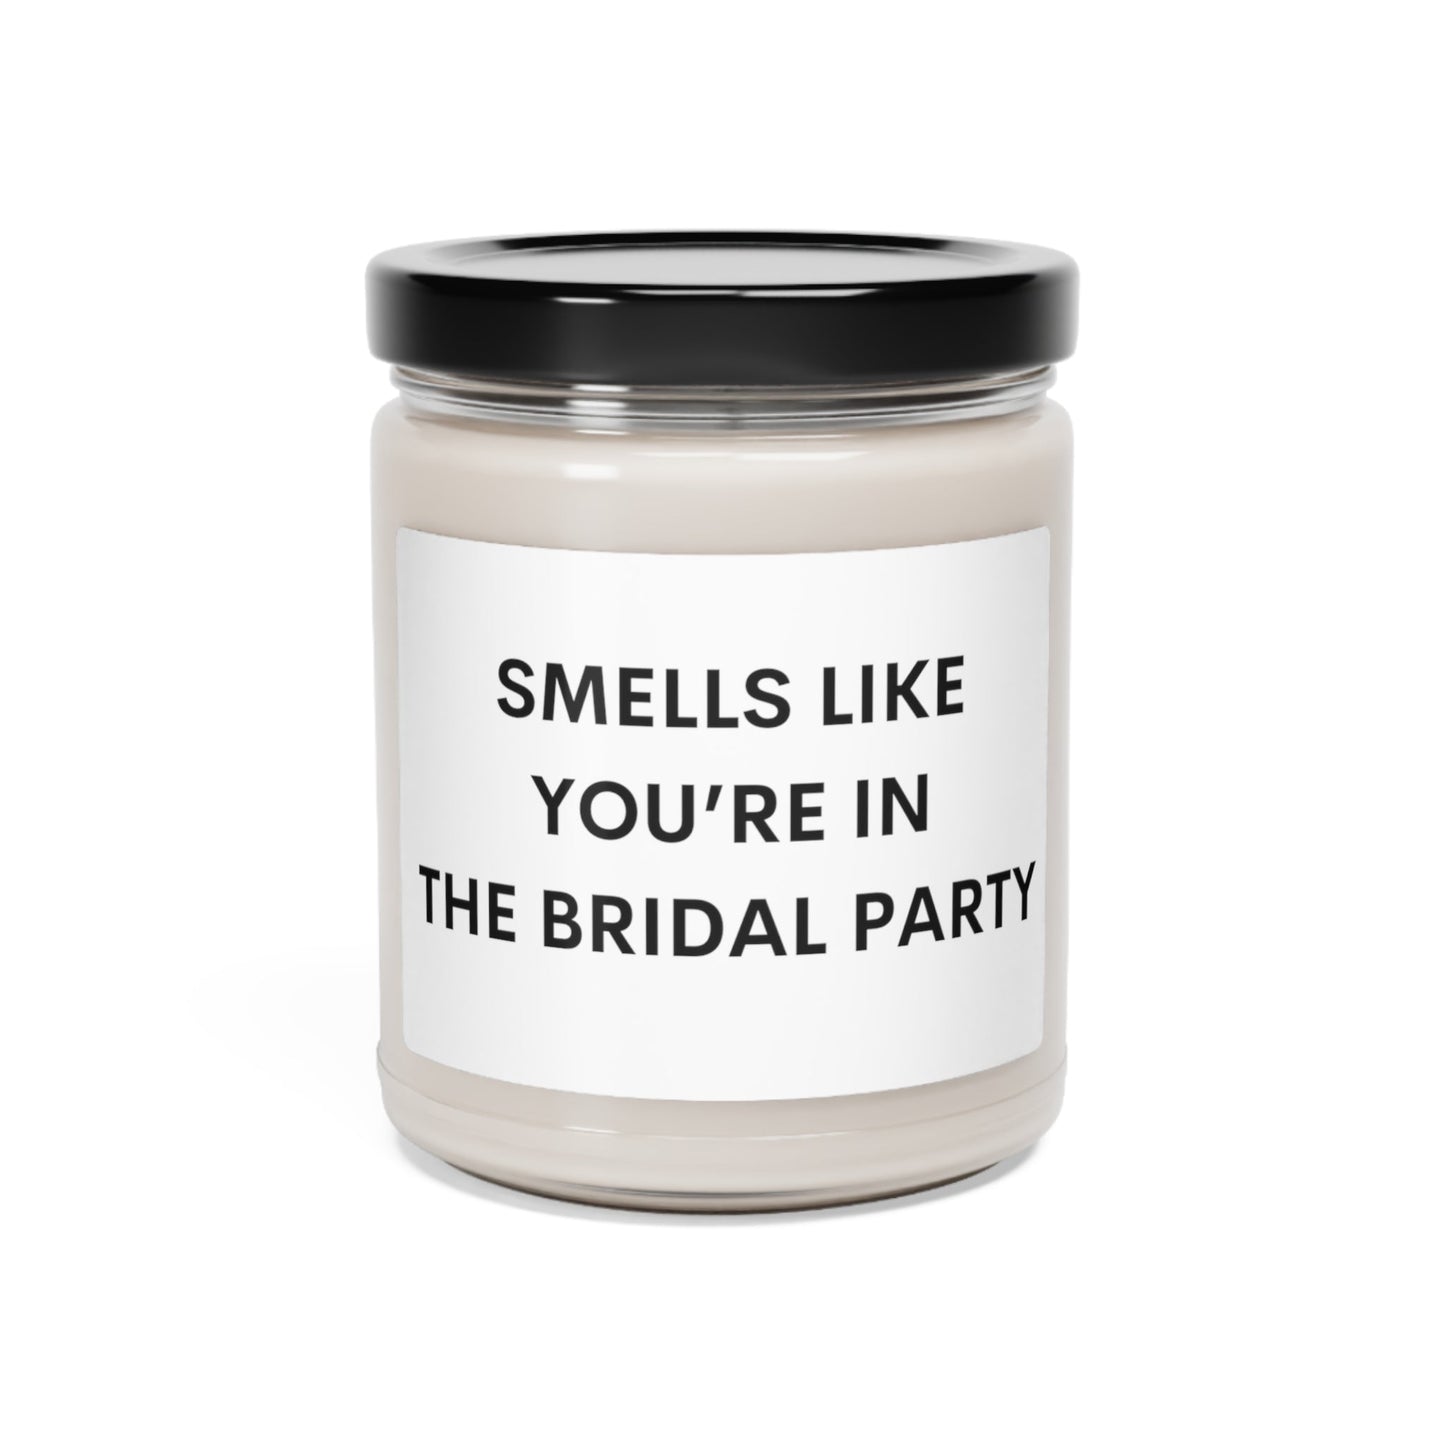 Get trendy with Smells Like You're in the Bridal Party - Home Decor available at Good Gift Company. Grab yours for $21 today!